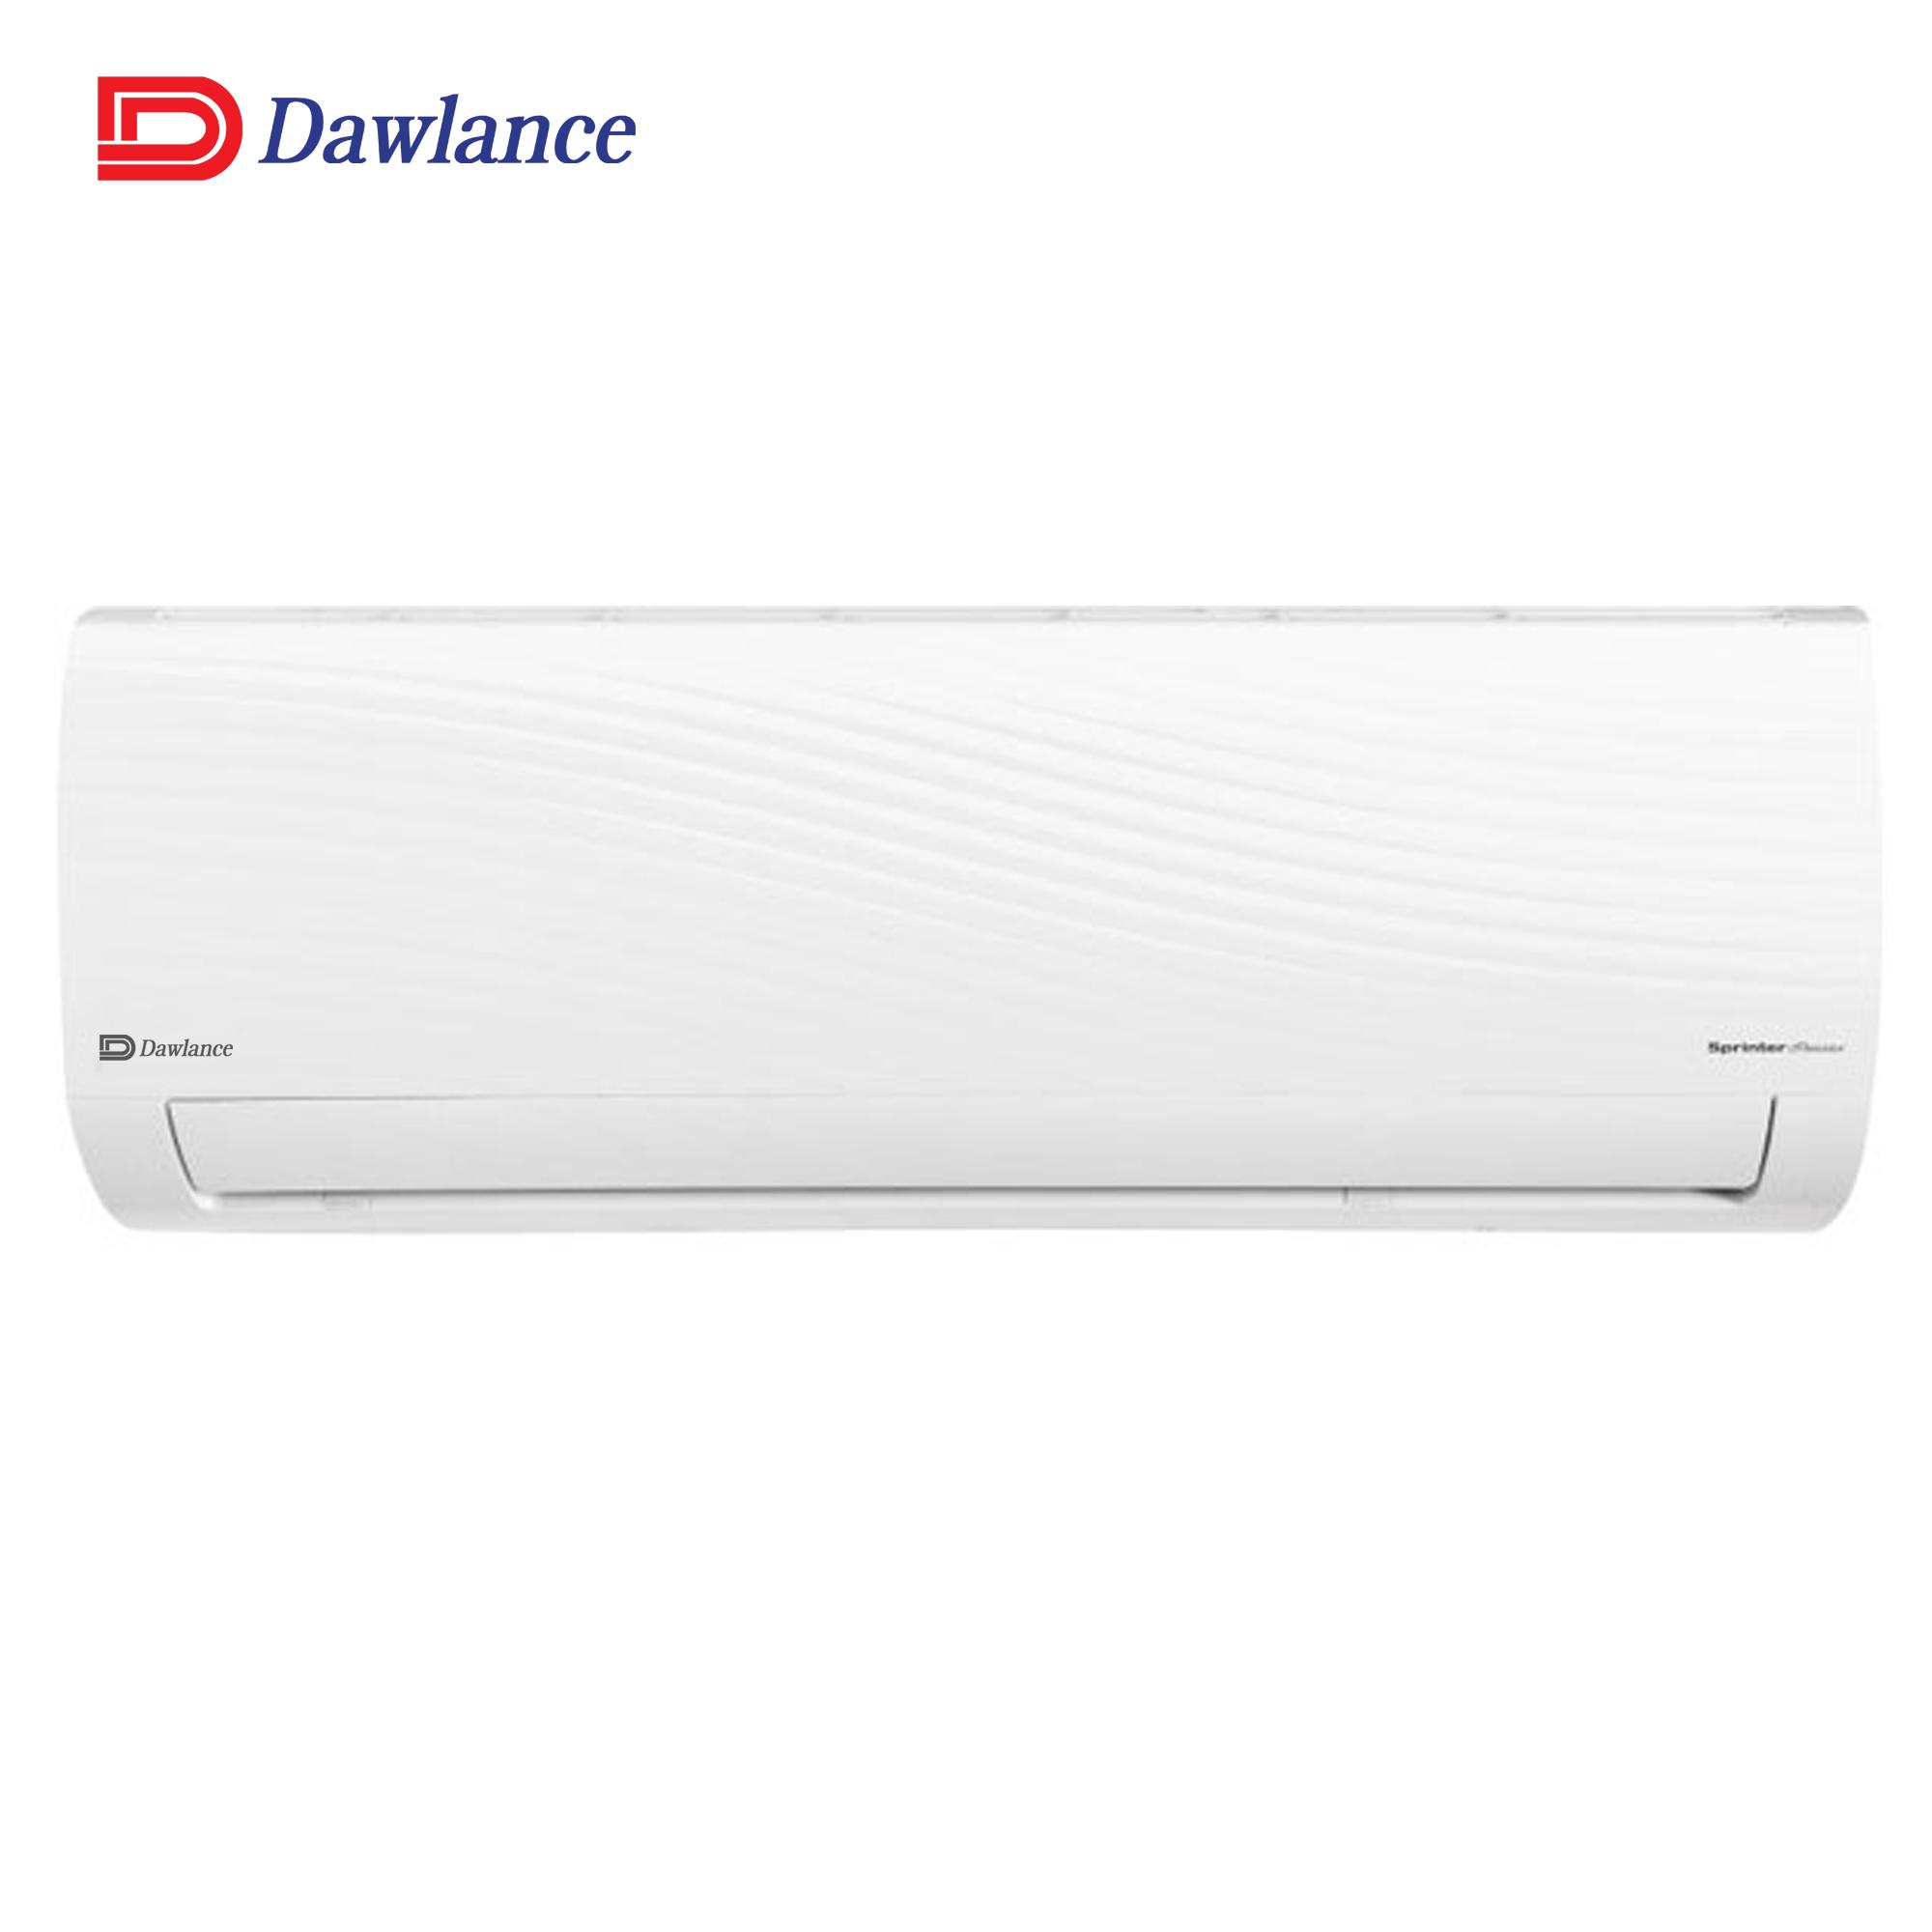 Dawlance Inverter ACs offer 4-year warranty on PCB Cards